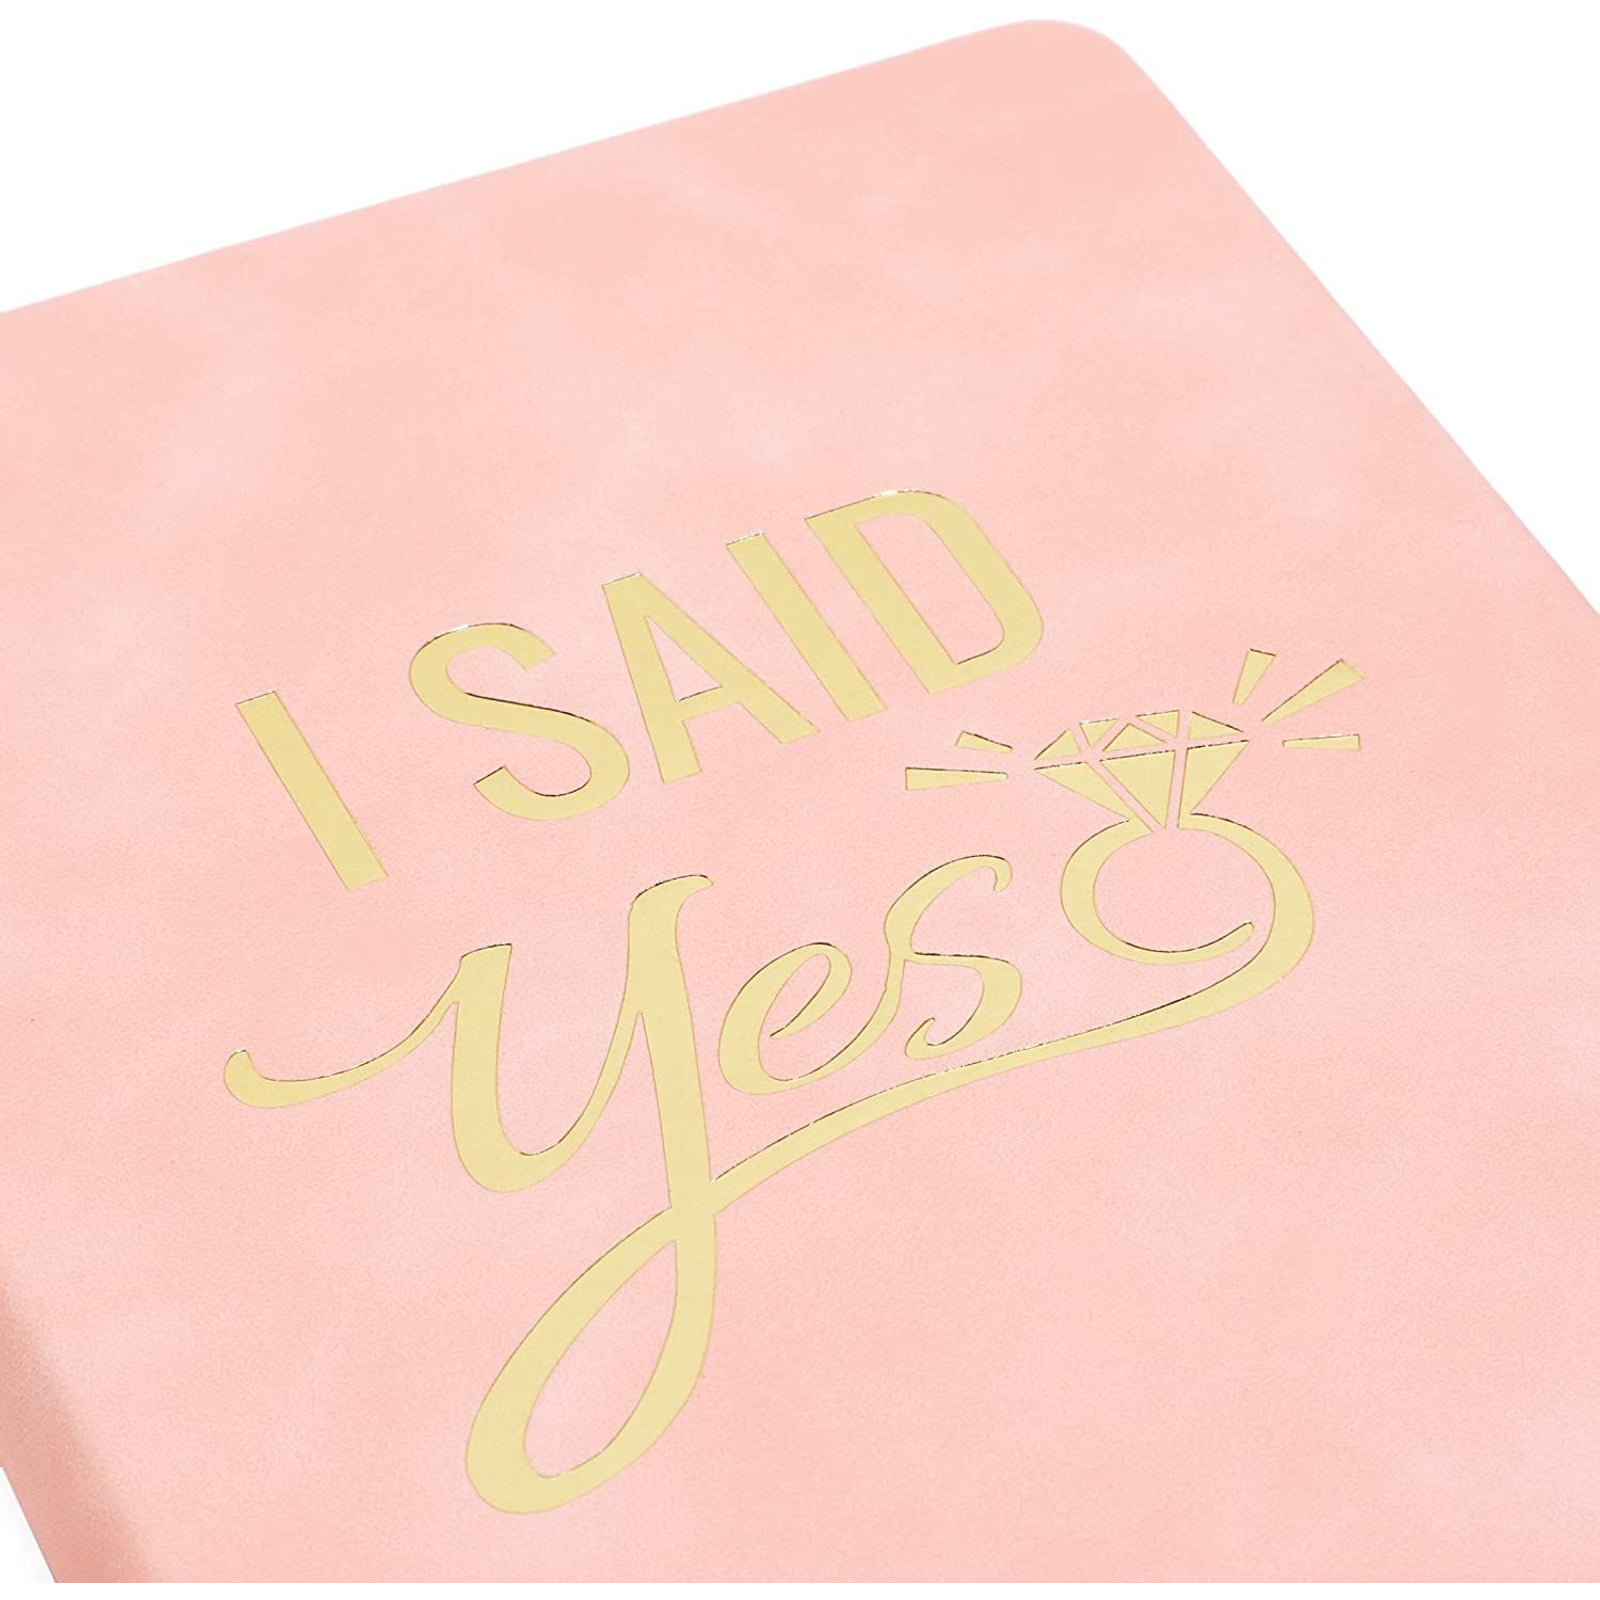 I Said Yes Notebook Wedding Planner Gold Foil Leather Cover Tassel Bookmark Pink 